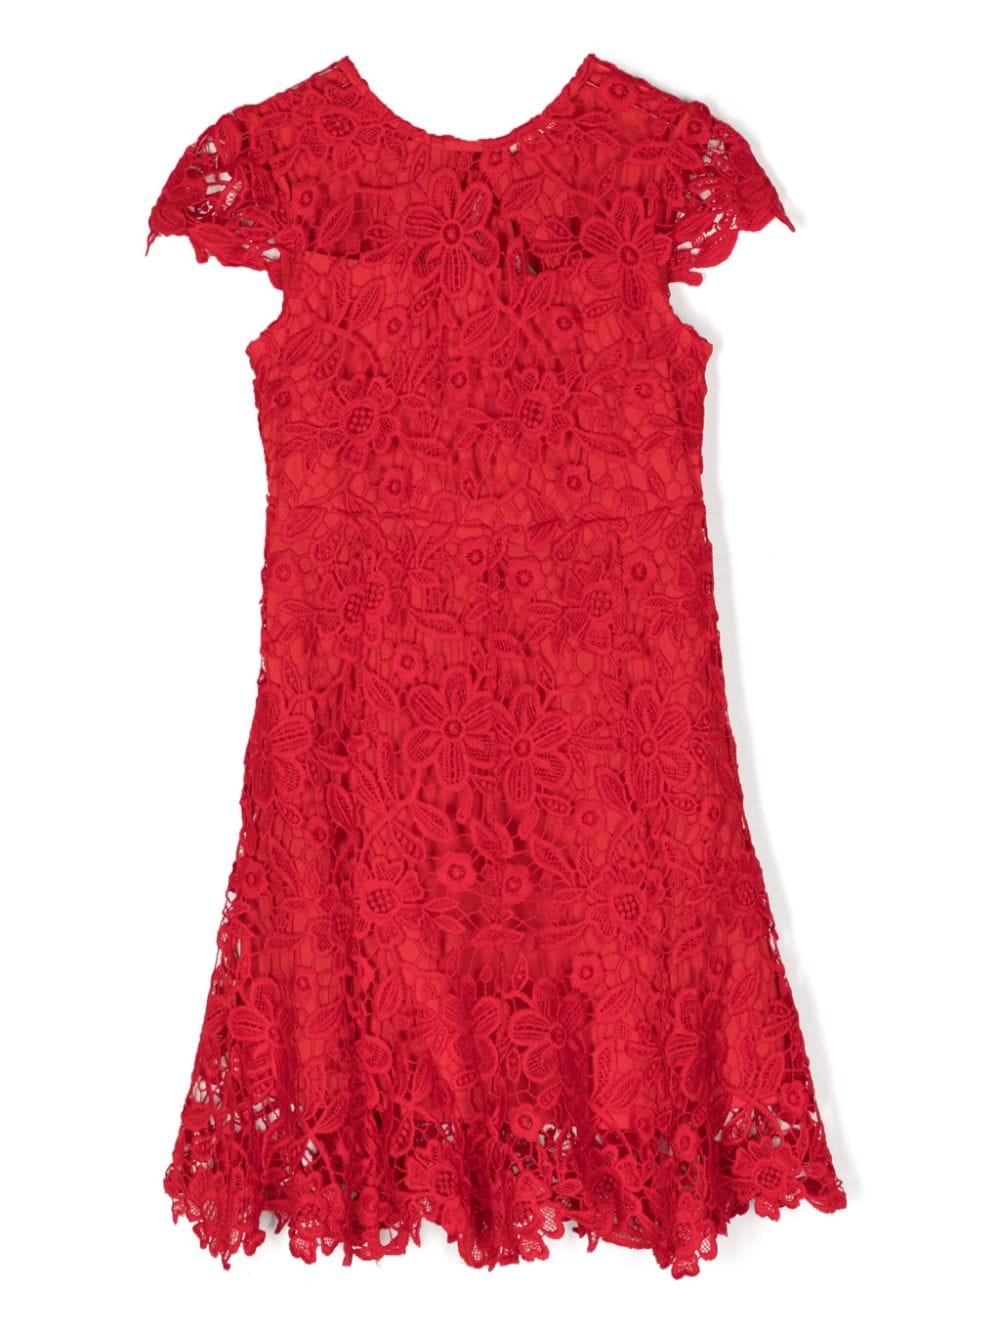 MARLO Holly Jolly floral-lace minidress - Rosso